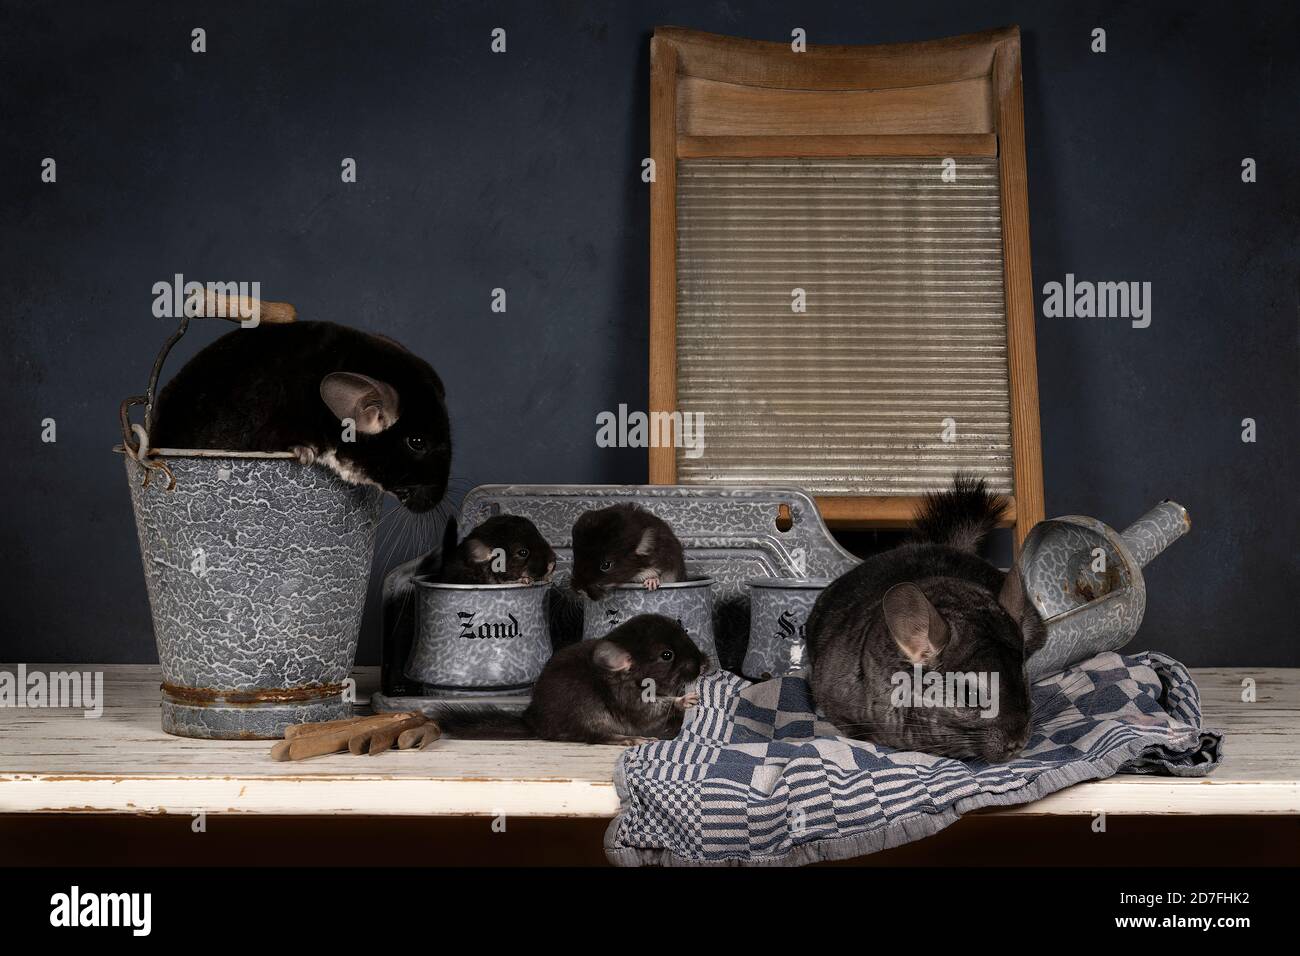 Family of grey black chinchillas with babies in a still life setting with old fashioned domestic kitchen tools Stock Photo